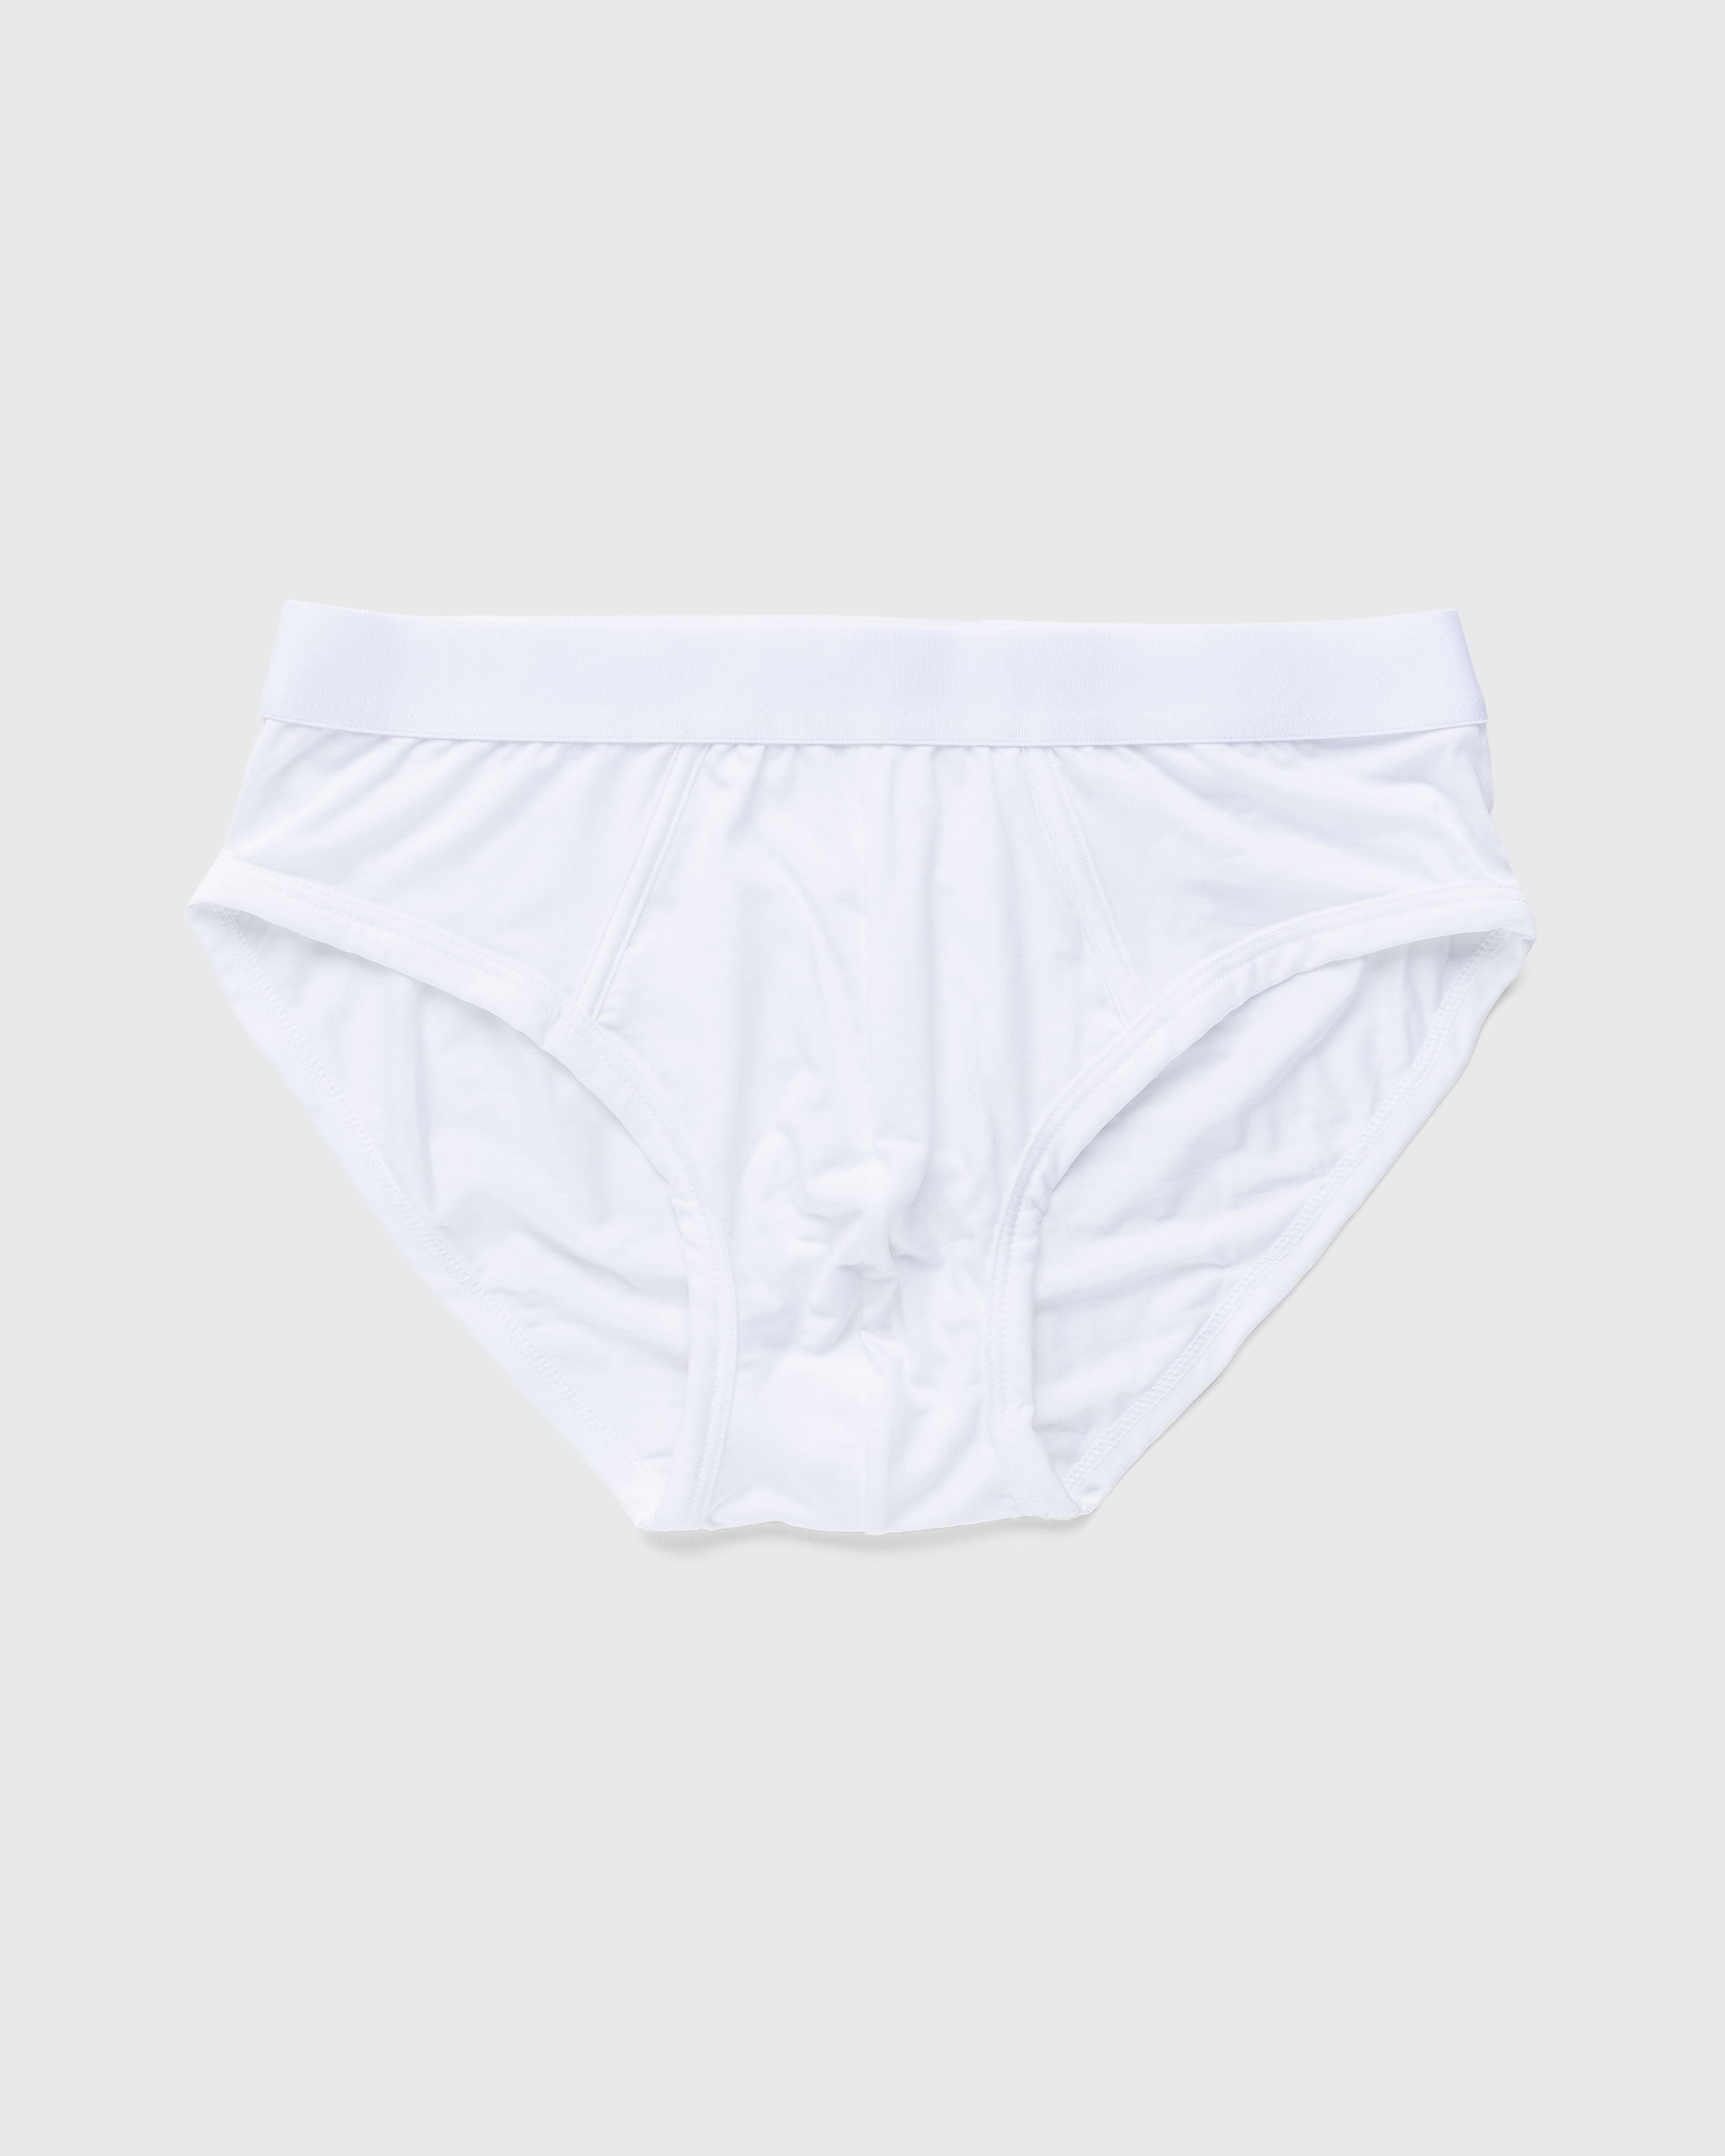 CDLP - Y-Brief White - Clothing - White - Image 1